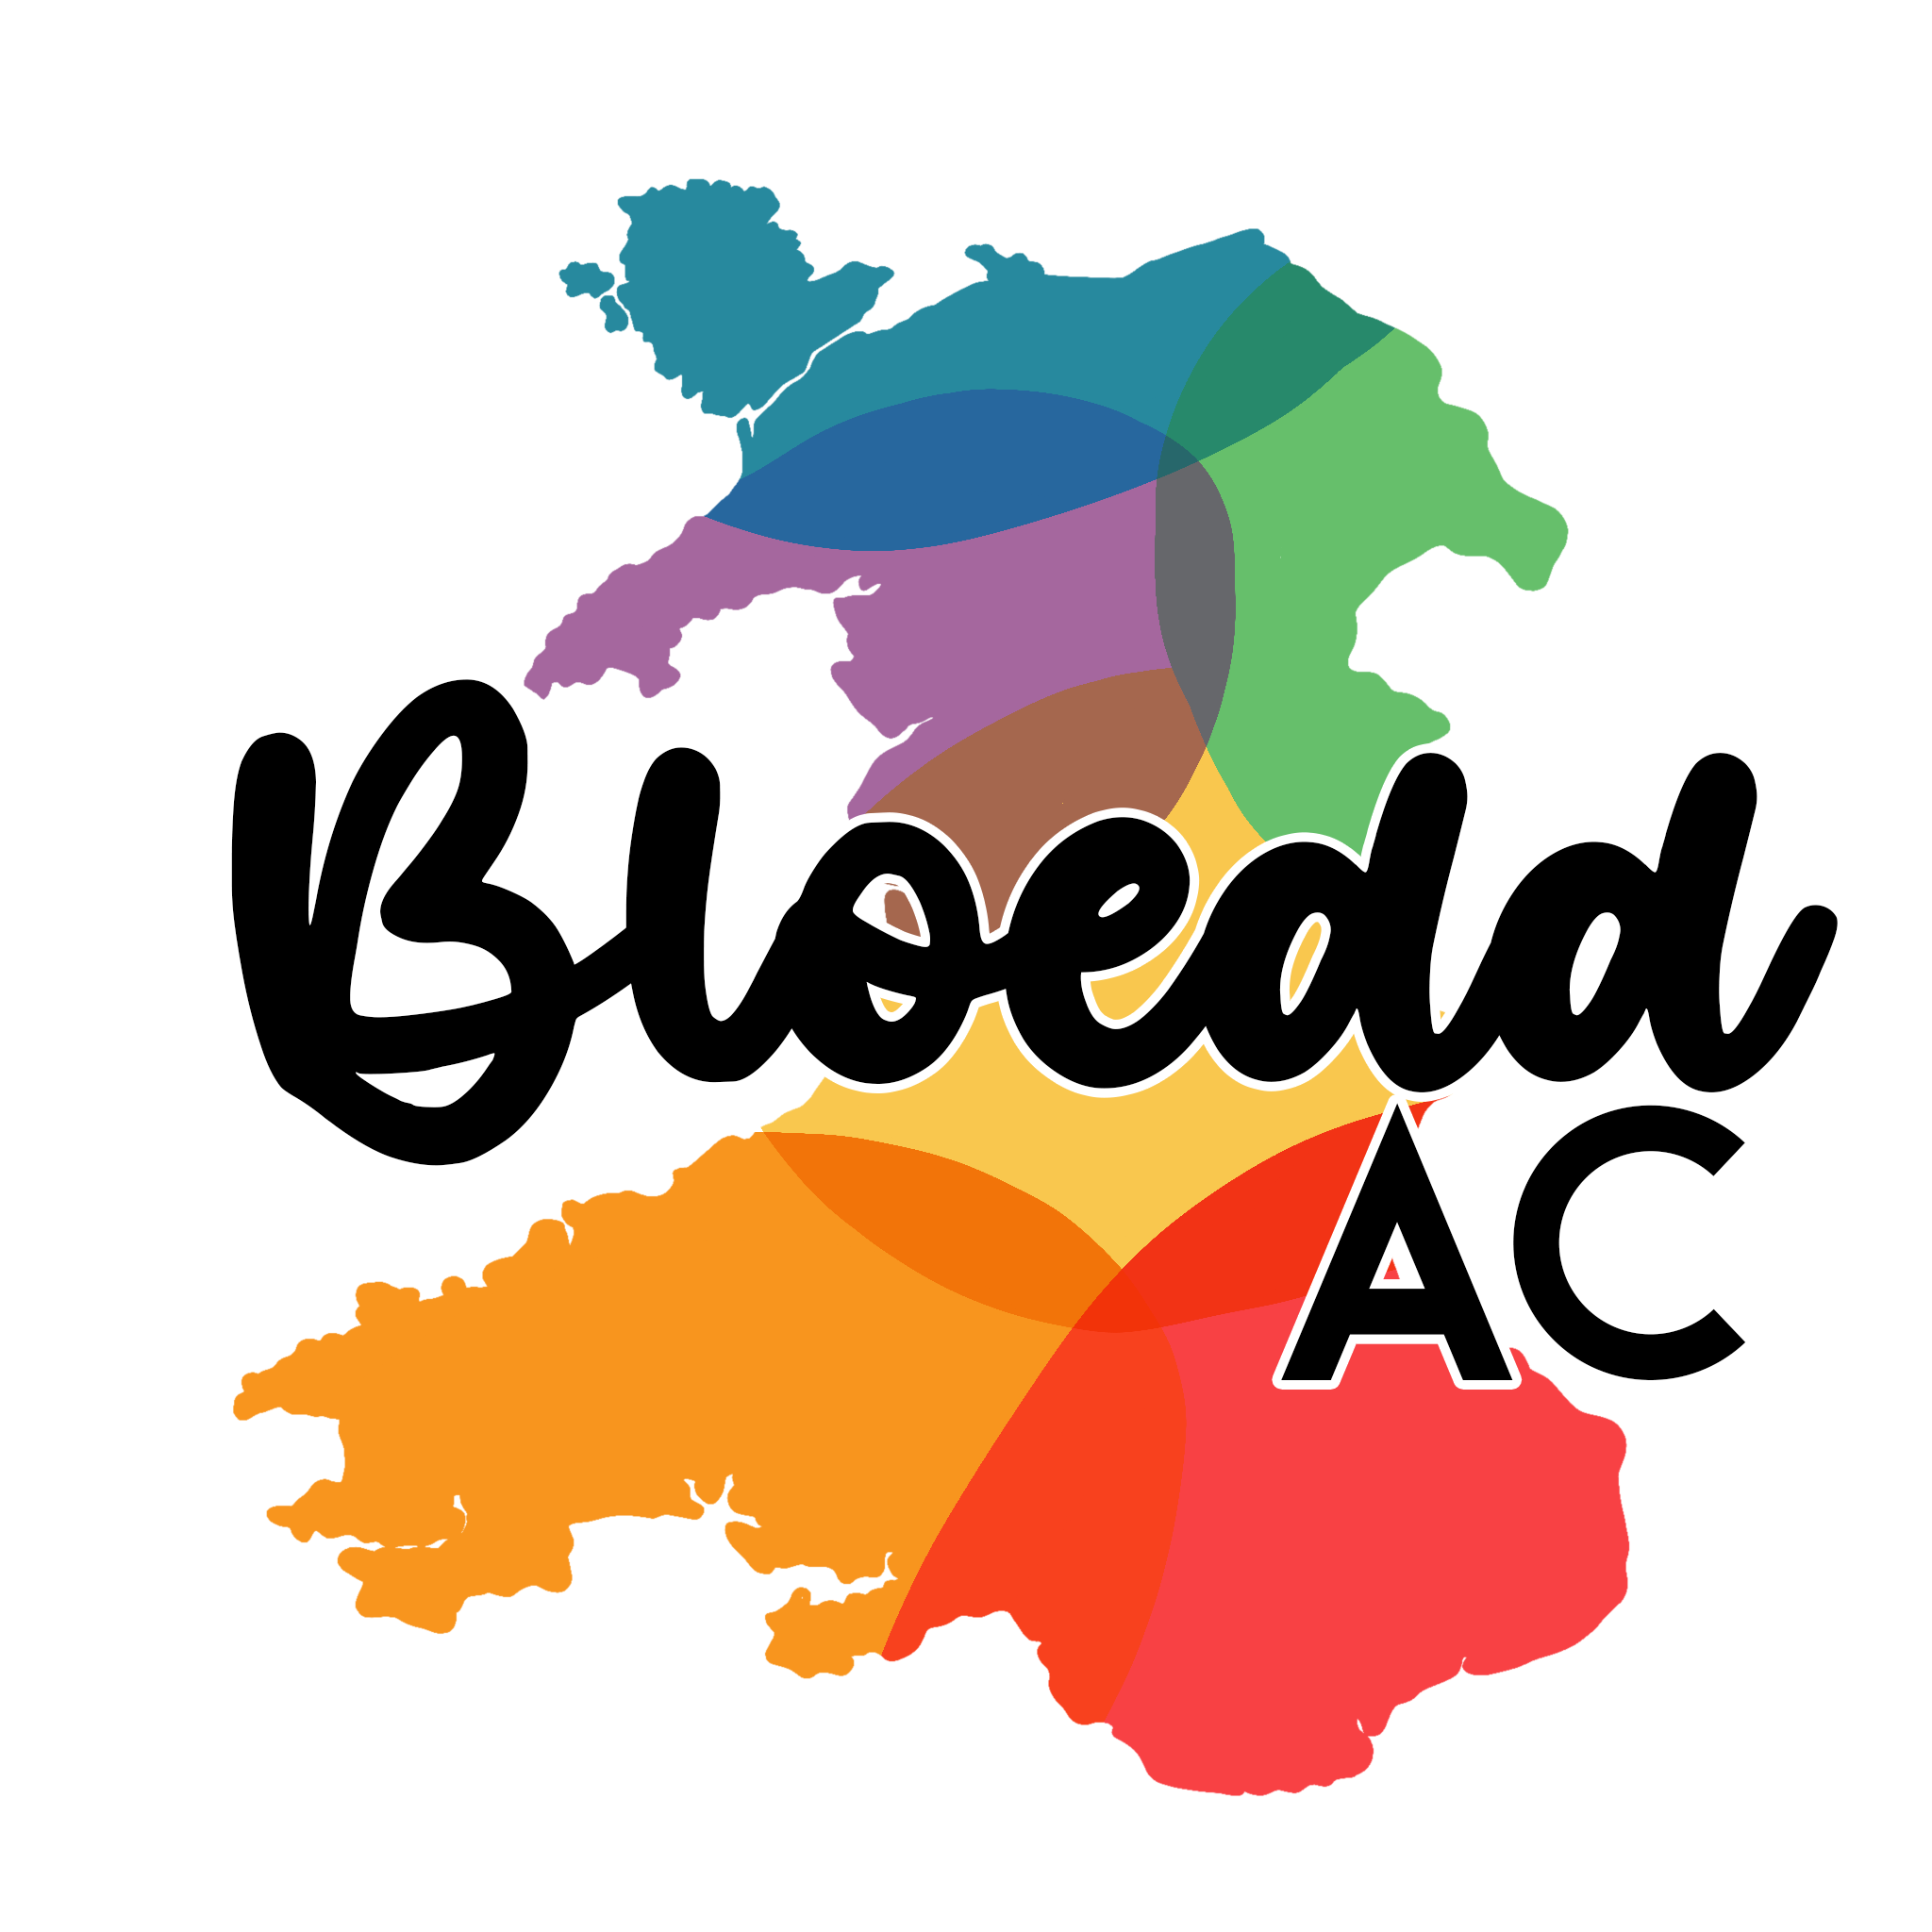 Multicoloured map of Wales with 'Bloedd AC' written on top